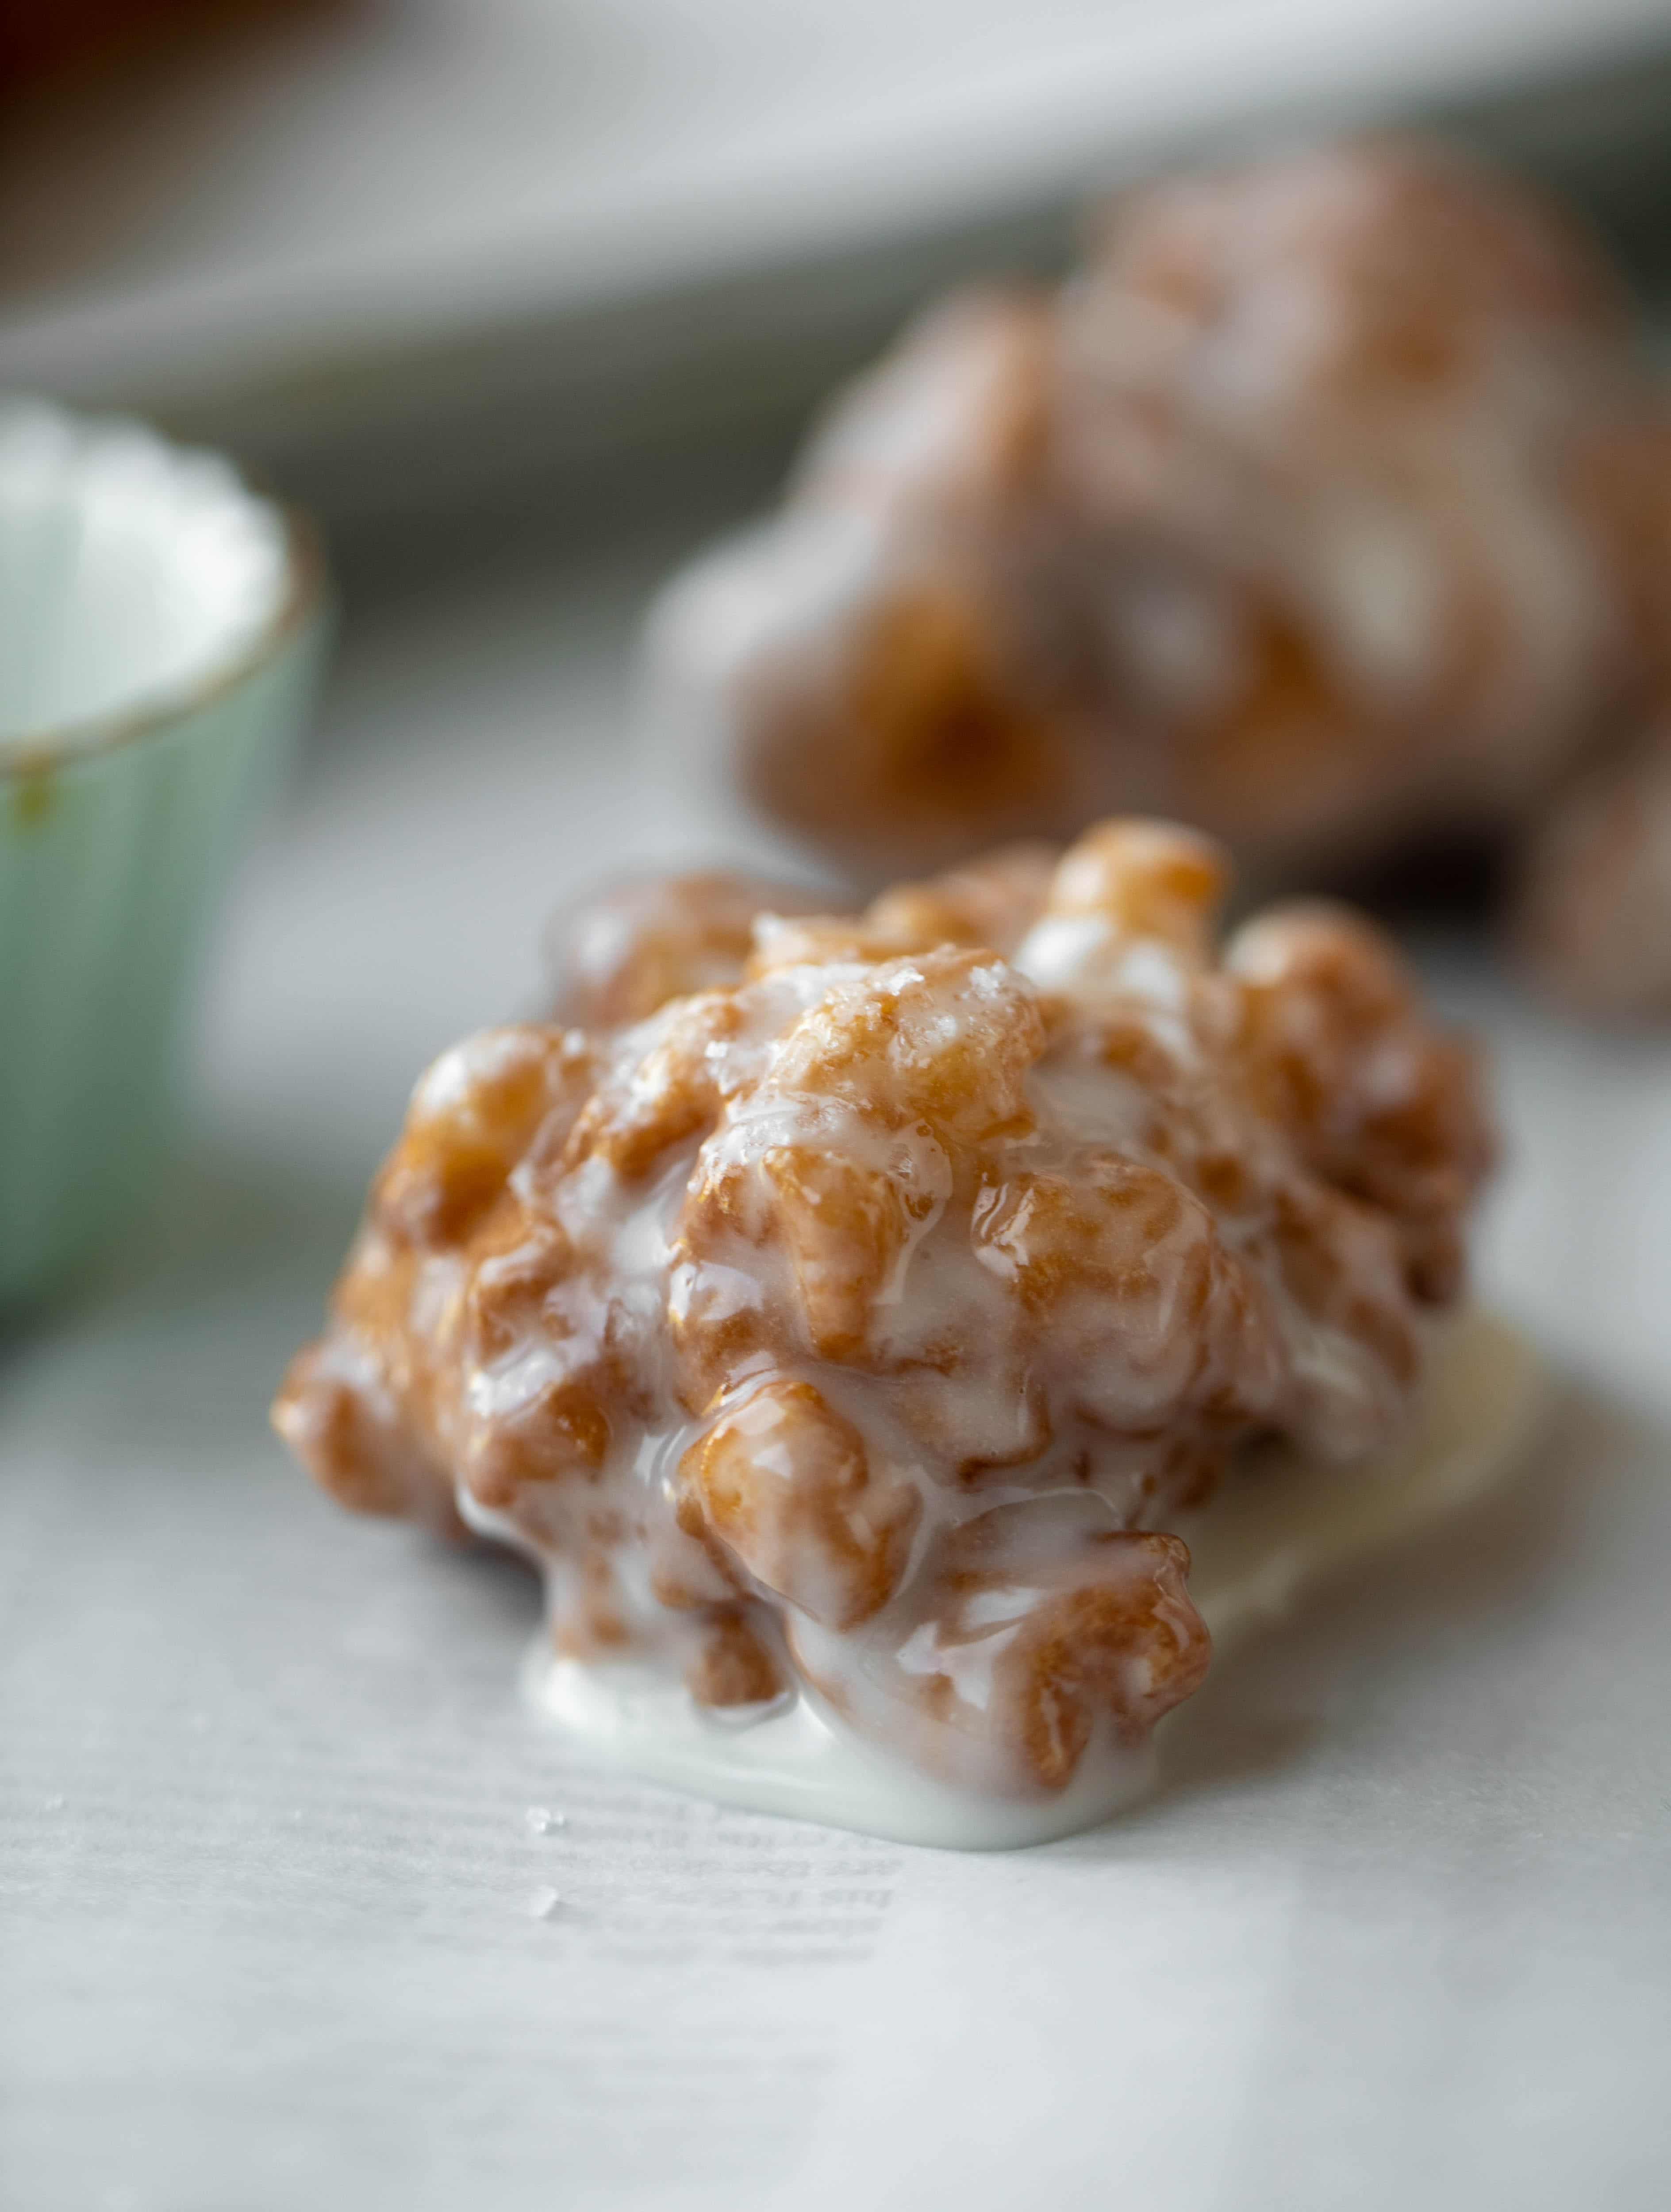 These salted apple fritters use honeycrisp apples and flaked sea salt for a fall flavor explosion. These are the best treat ever!